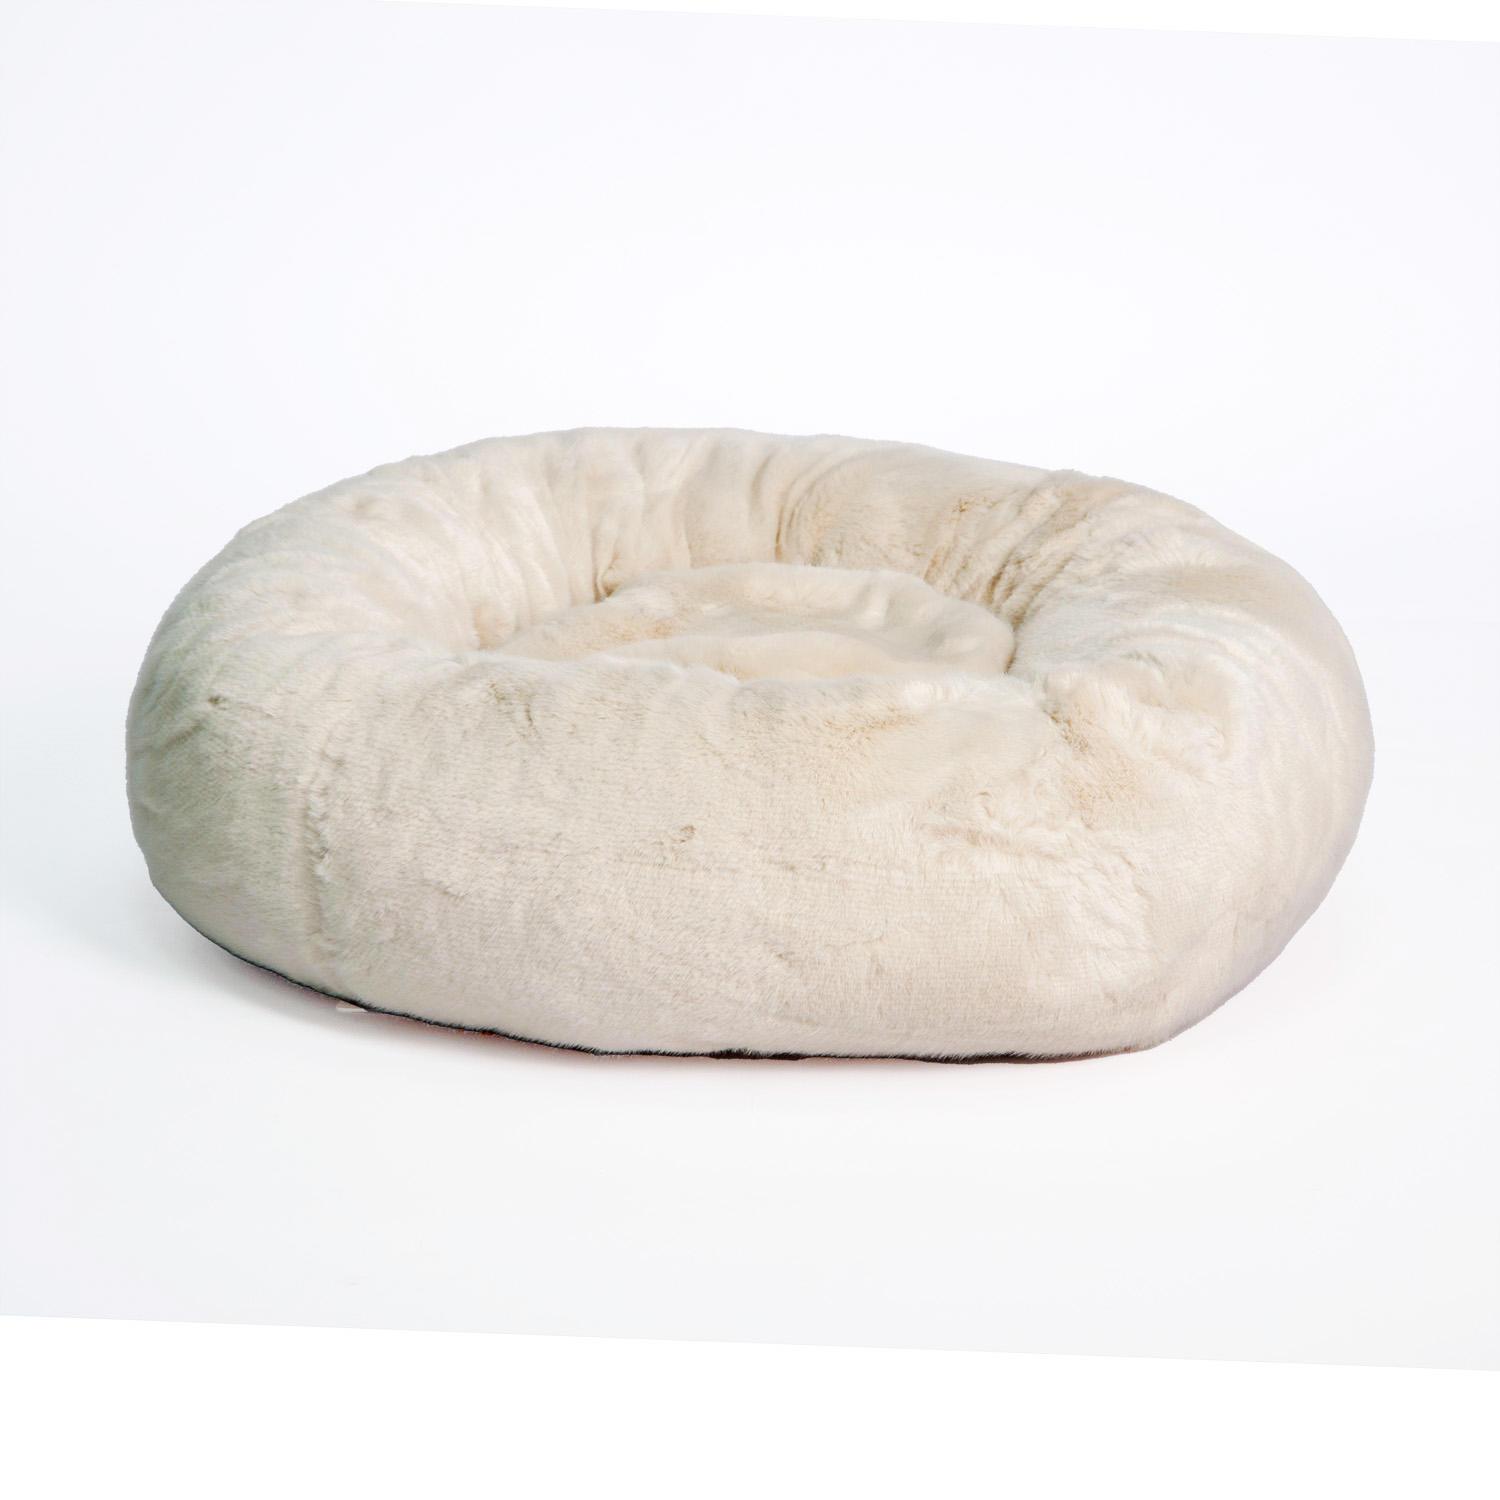 Wholesale-dog-beds Waterproof And Dry Bed Printing Dry Fleece Vet Bedding Soft Bed Dog